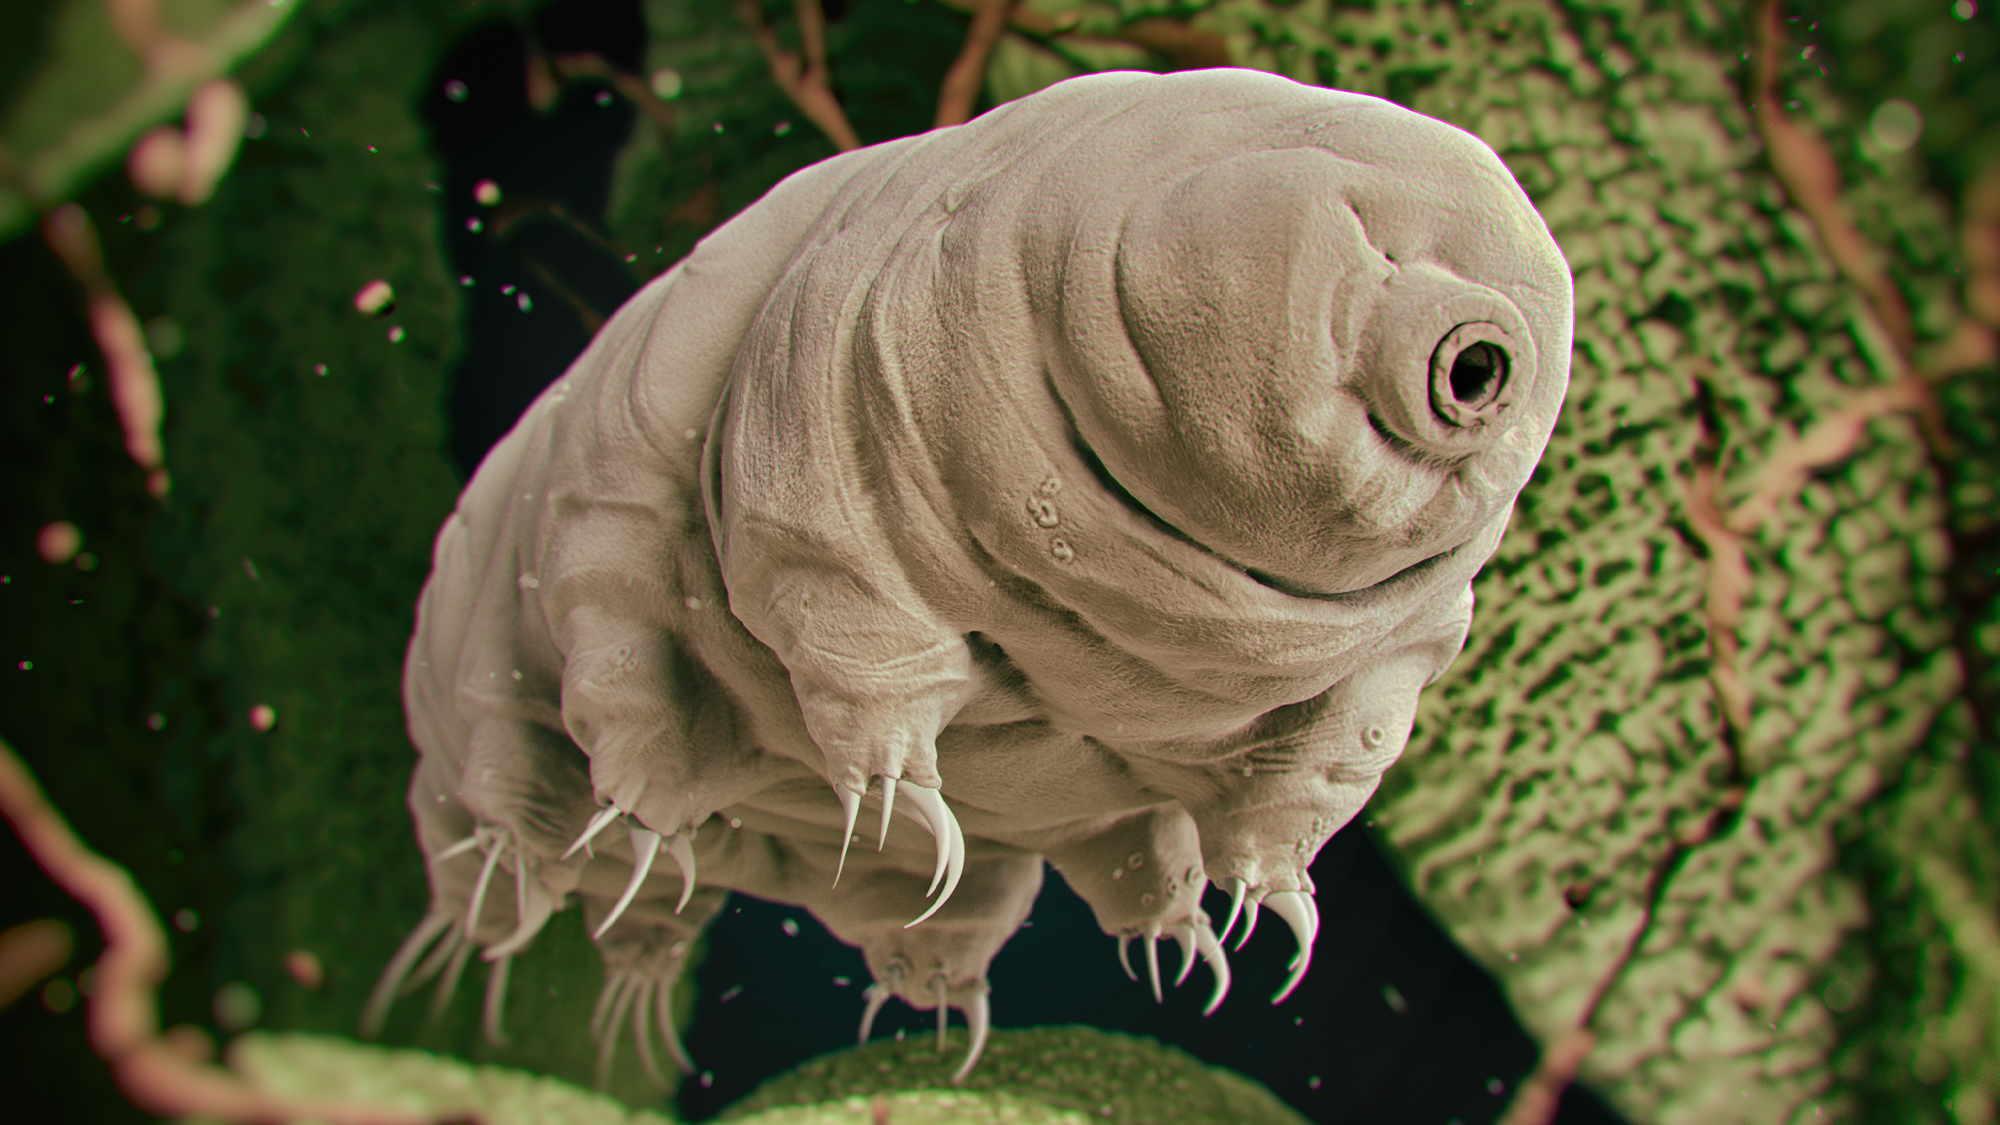 We may know what makes tardigrades so darn tough